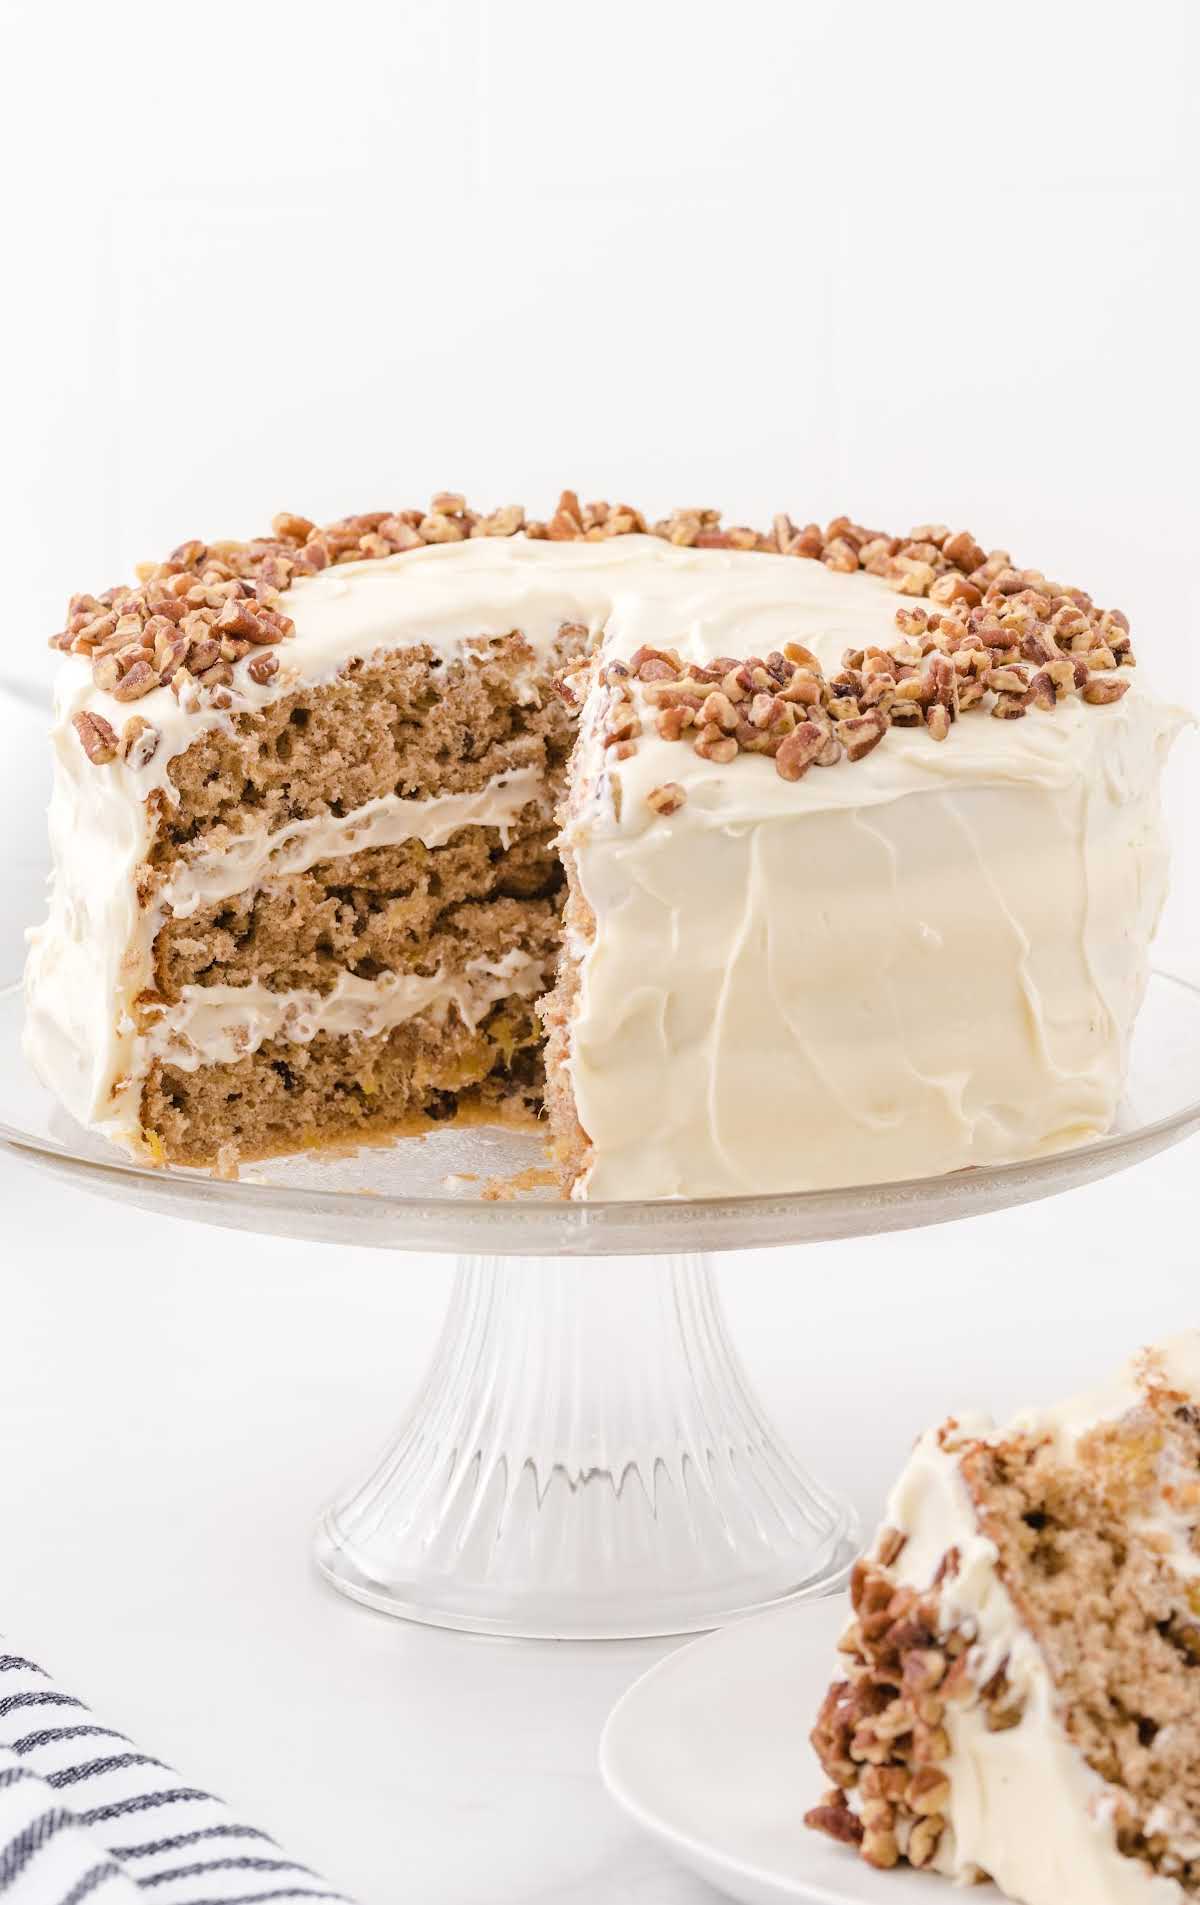 hummingbird cake topped with pecans on a cake stand